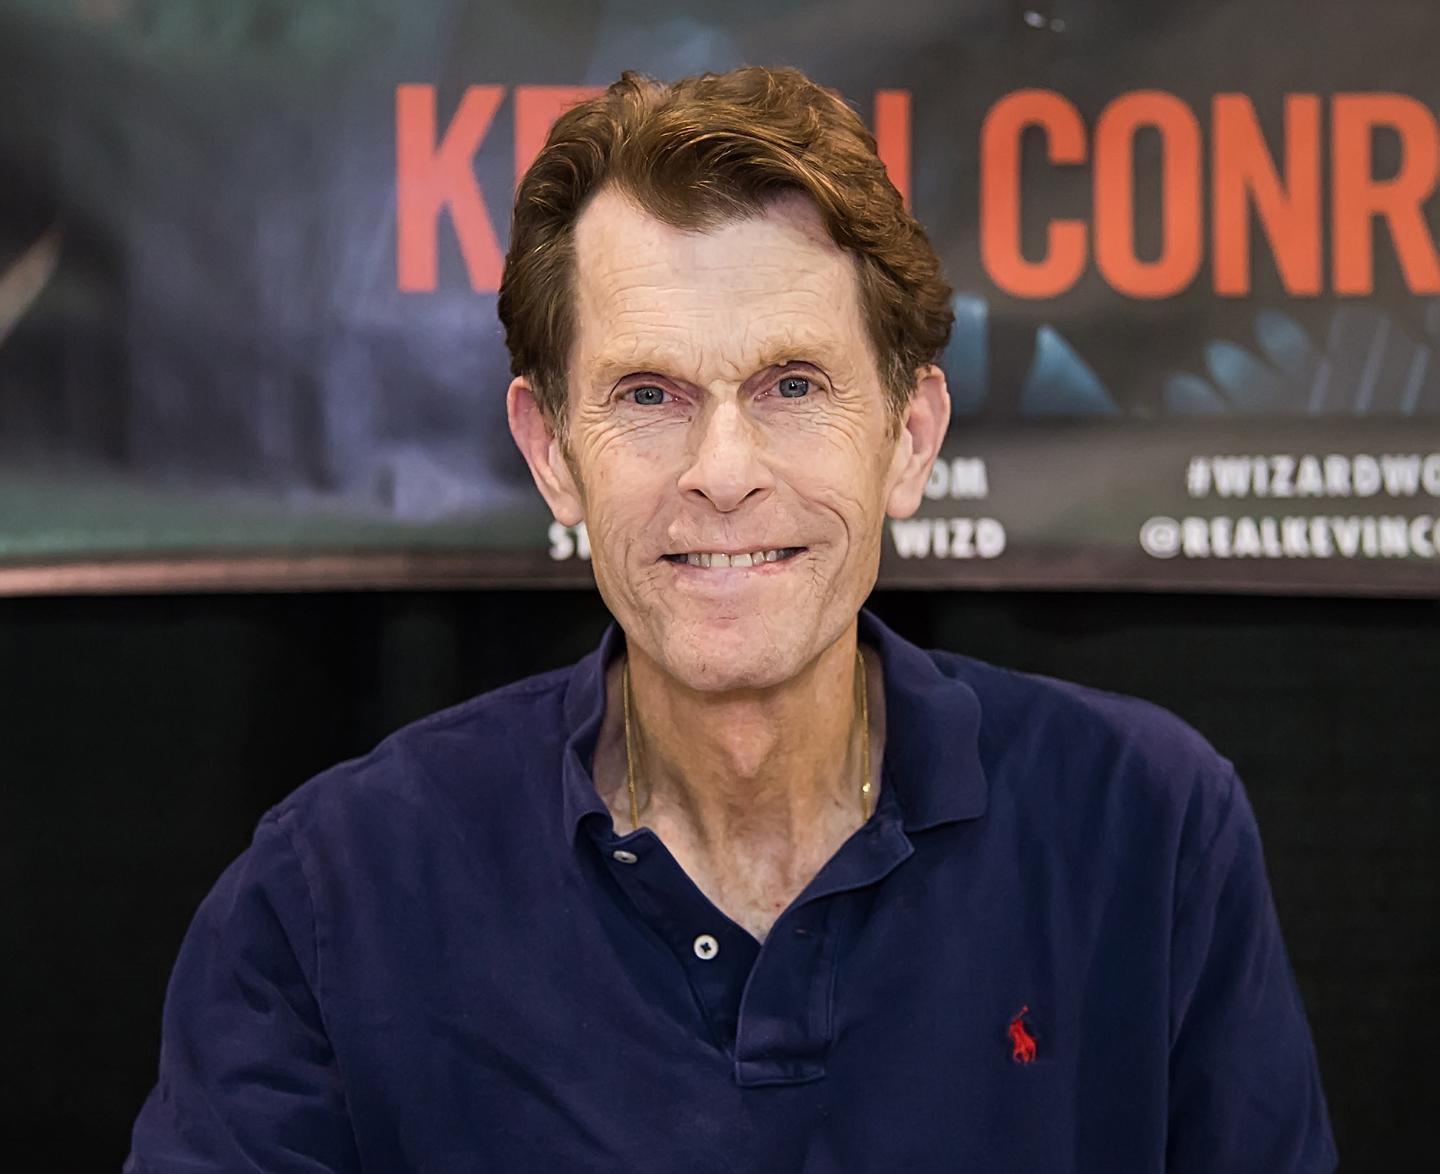 Kevin Conroy, voice of Batman, has died at the age of 66